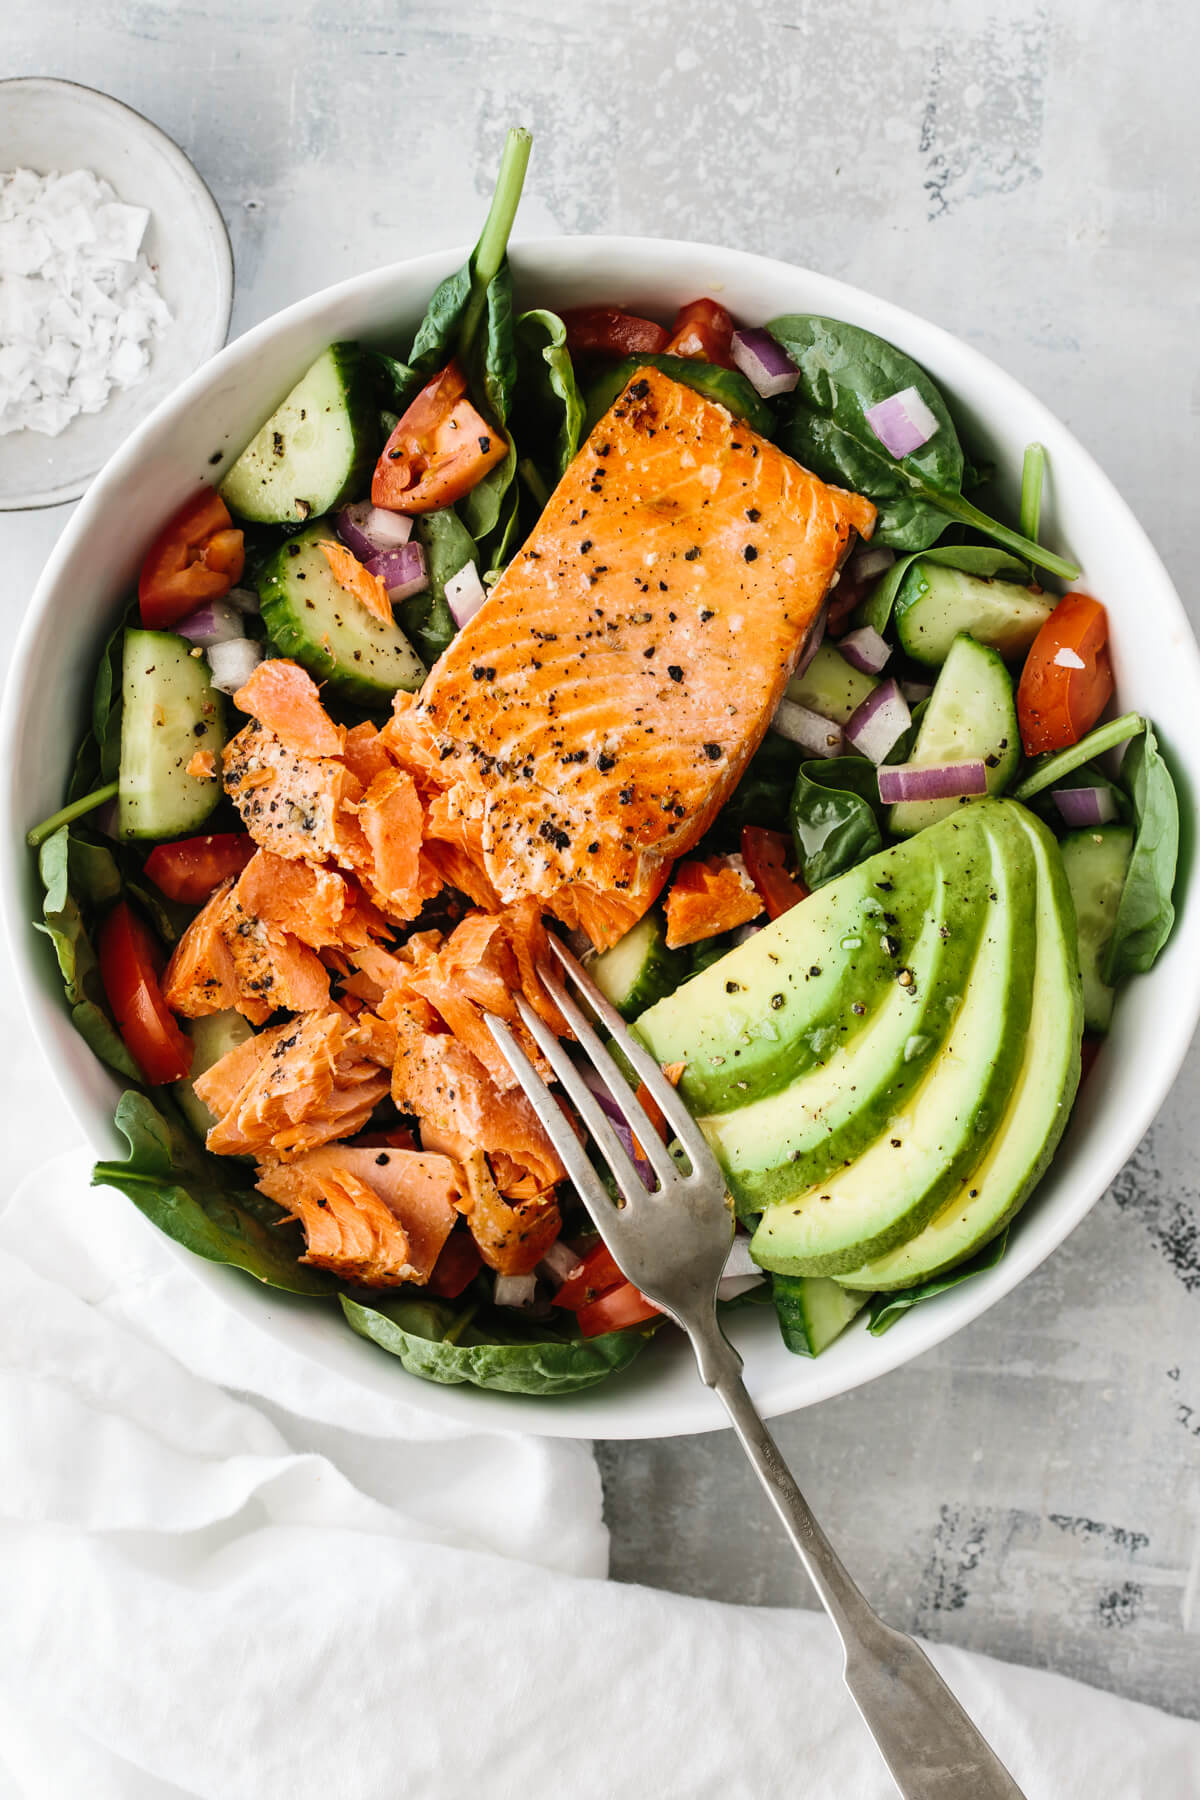 Salmon fillet on salad with avocado slices.